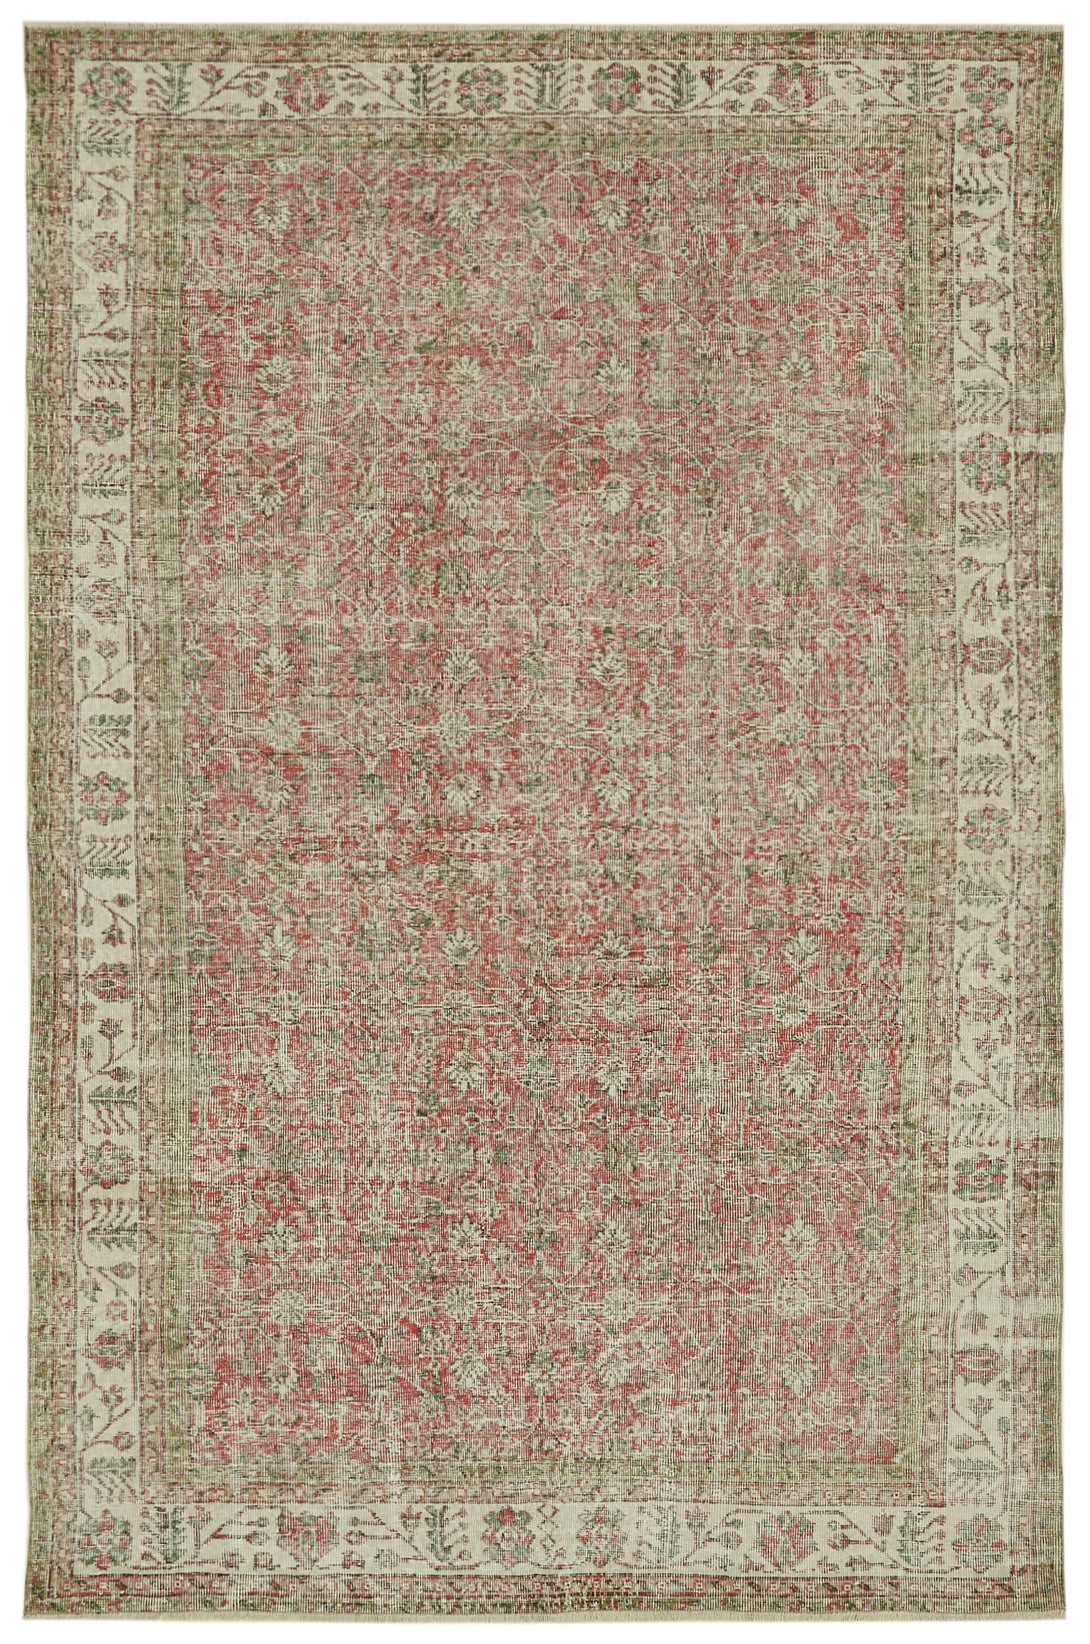 Handmade White Wash Area Rug > Design# OL-AC-41723 > Size: 6'-9" x 10'-2", Carpet Culture Rugs, Handmade Rugs, NYC Rugs, New Rugs, Shop Rugs, Rug Store, Outlet Rugs, SoHo Rugs, Rugs in USA